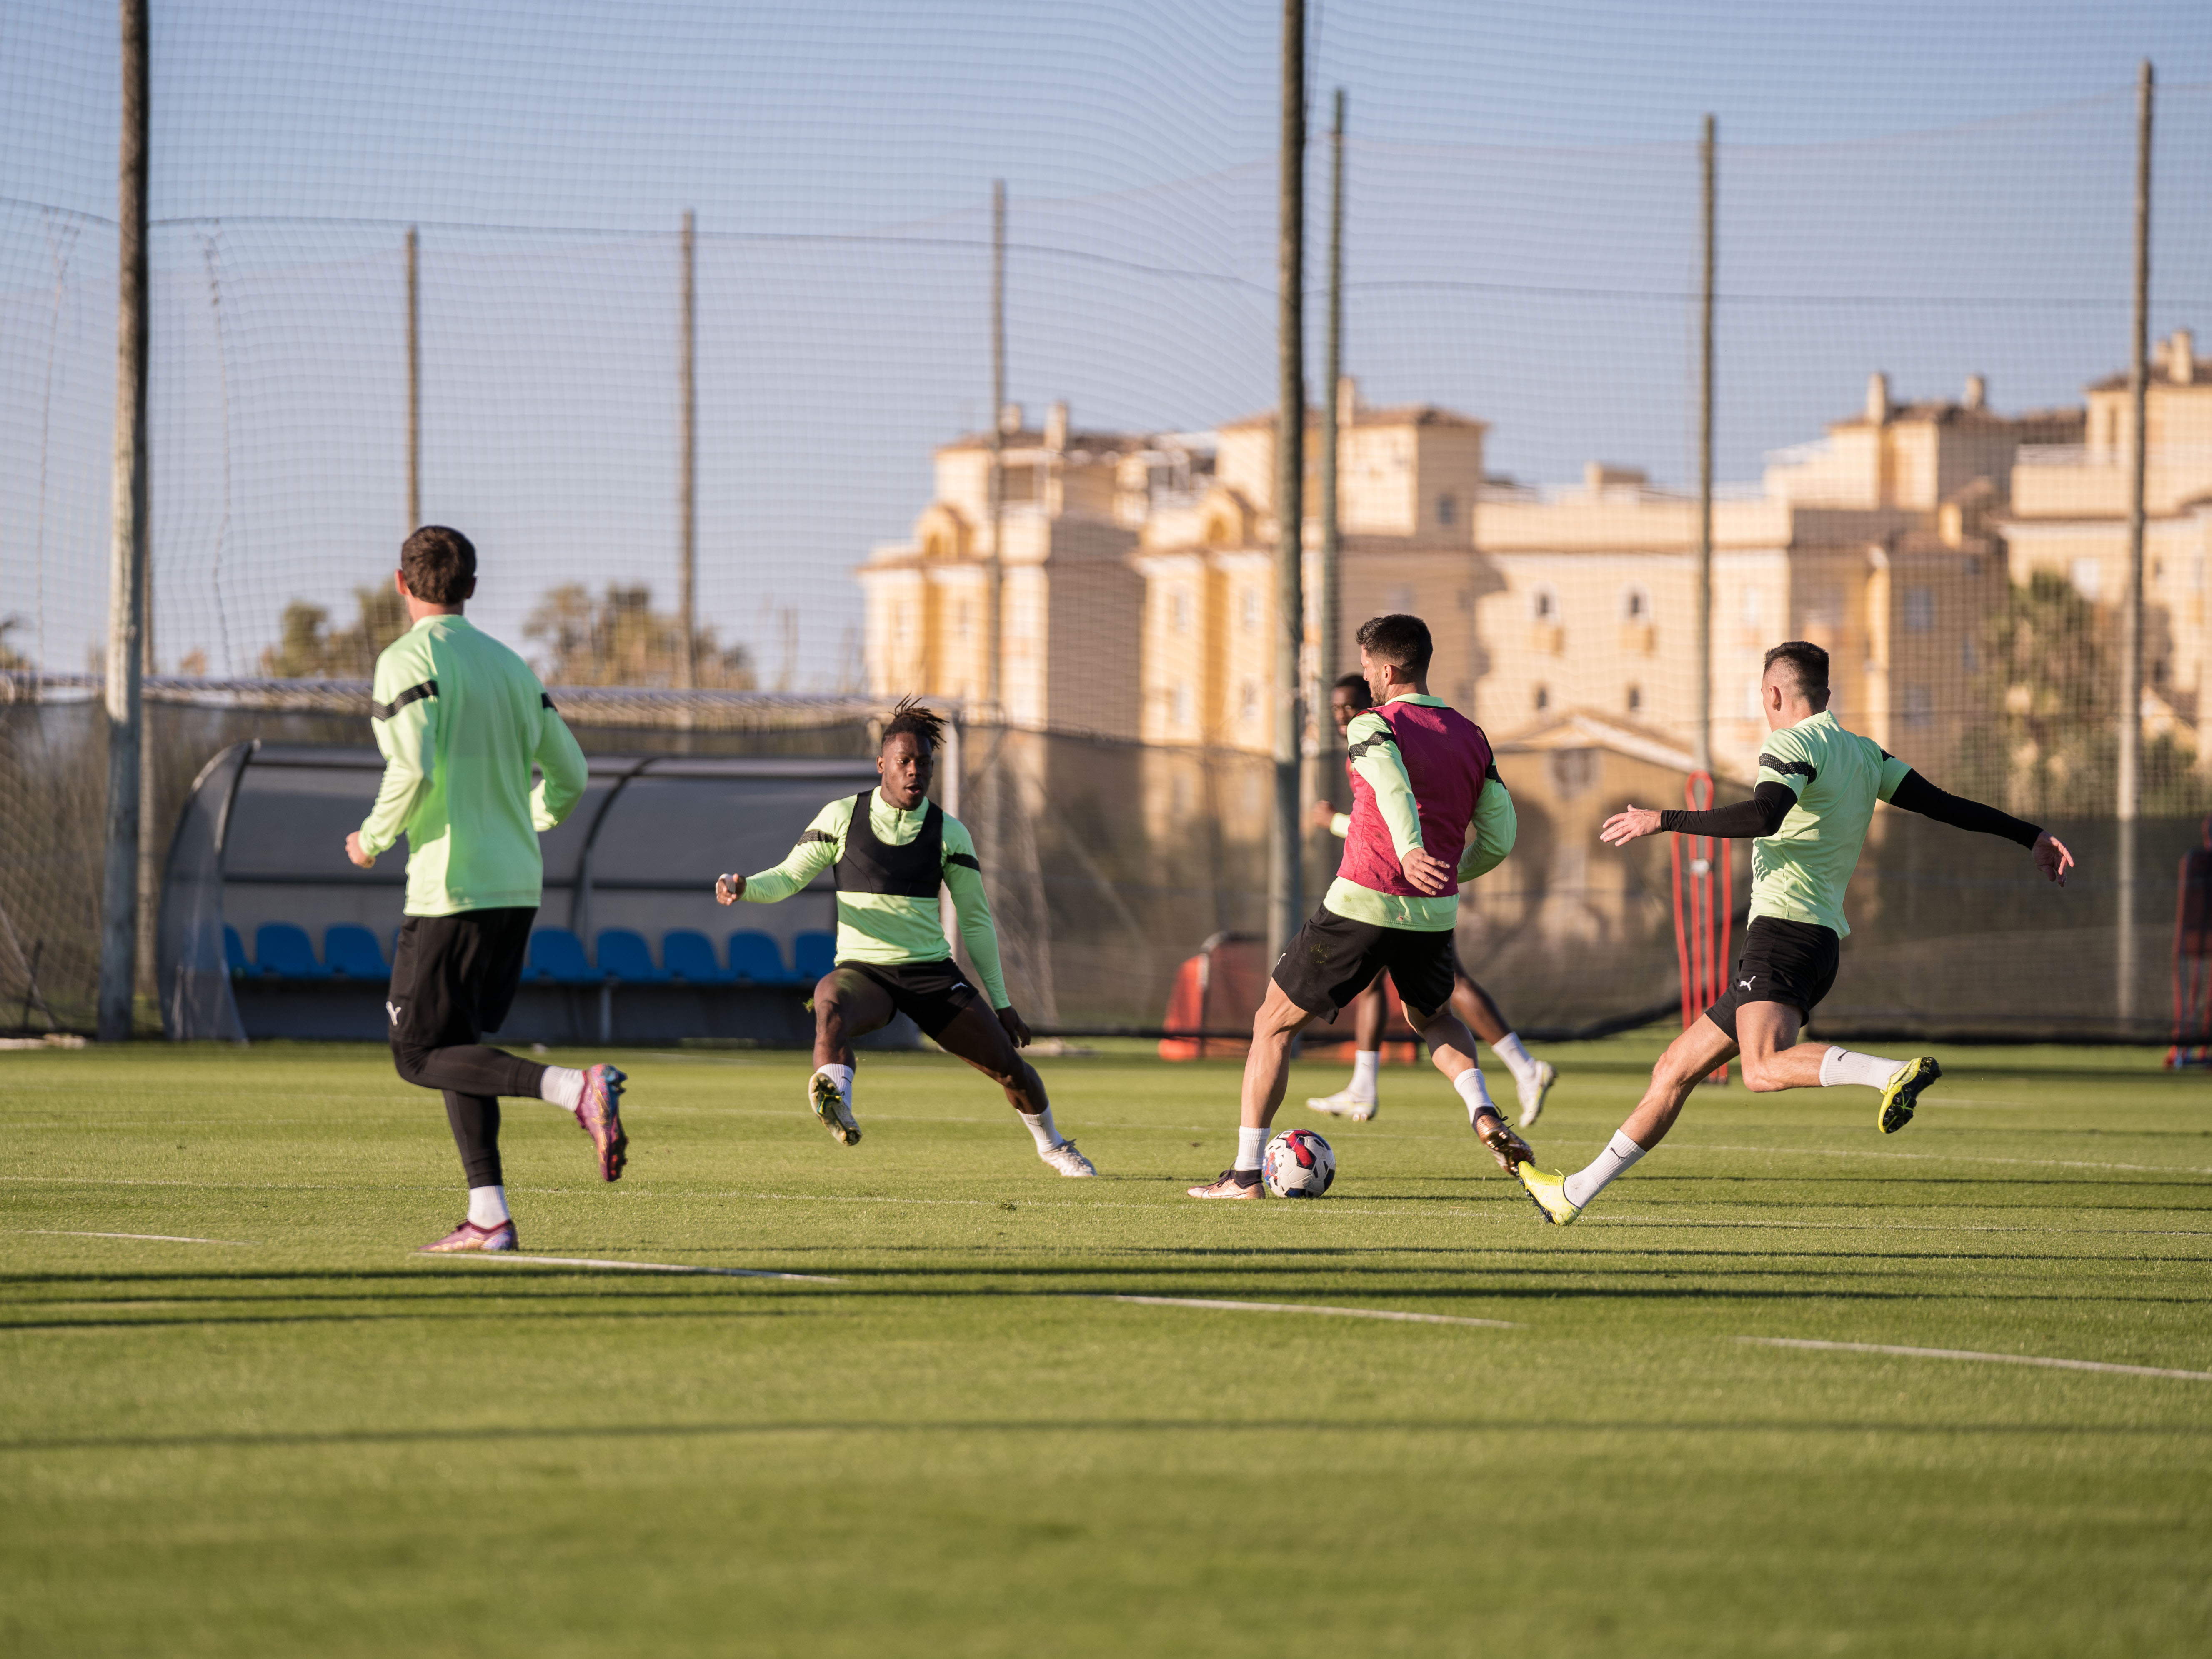 Albion players compete in Spain during their warm weather training camp